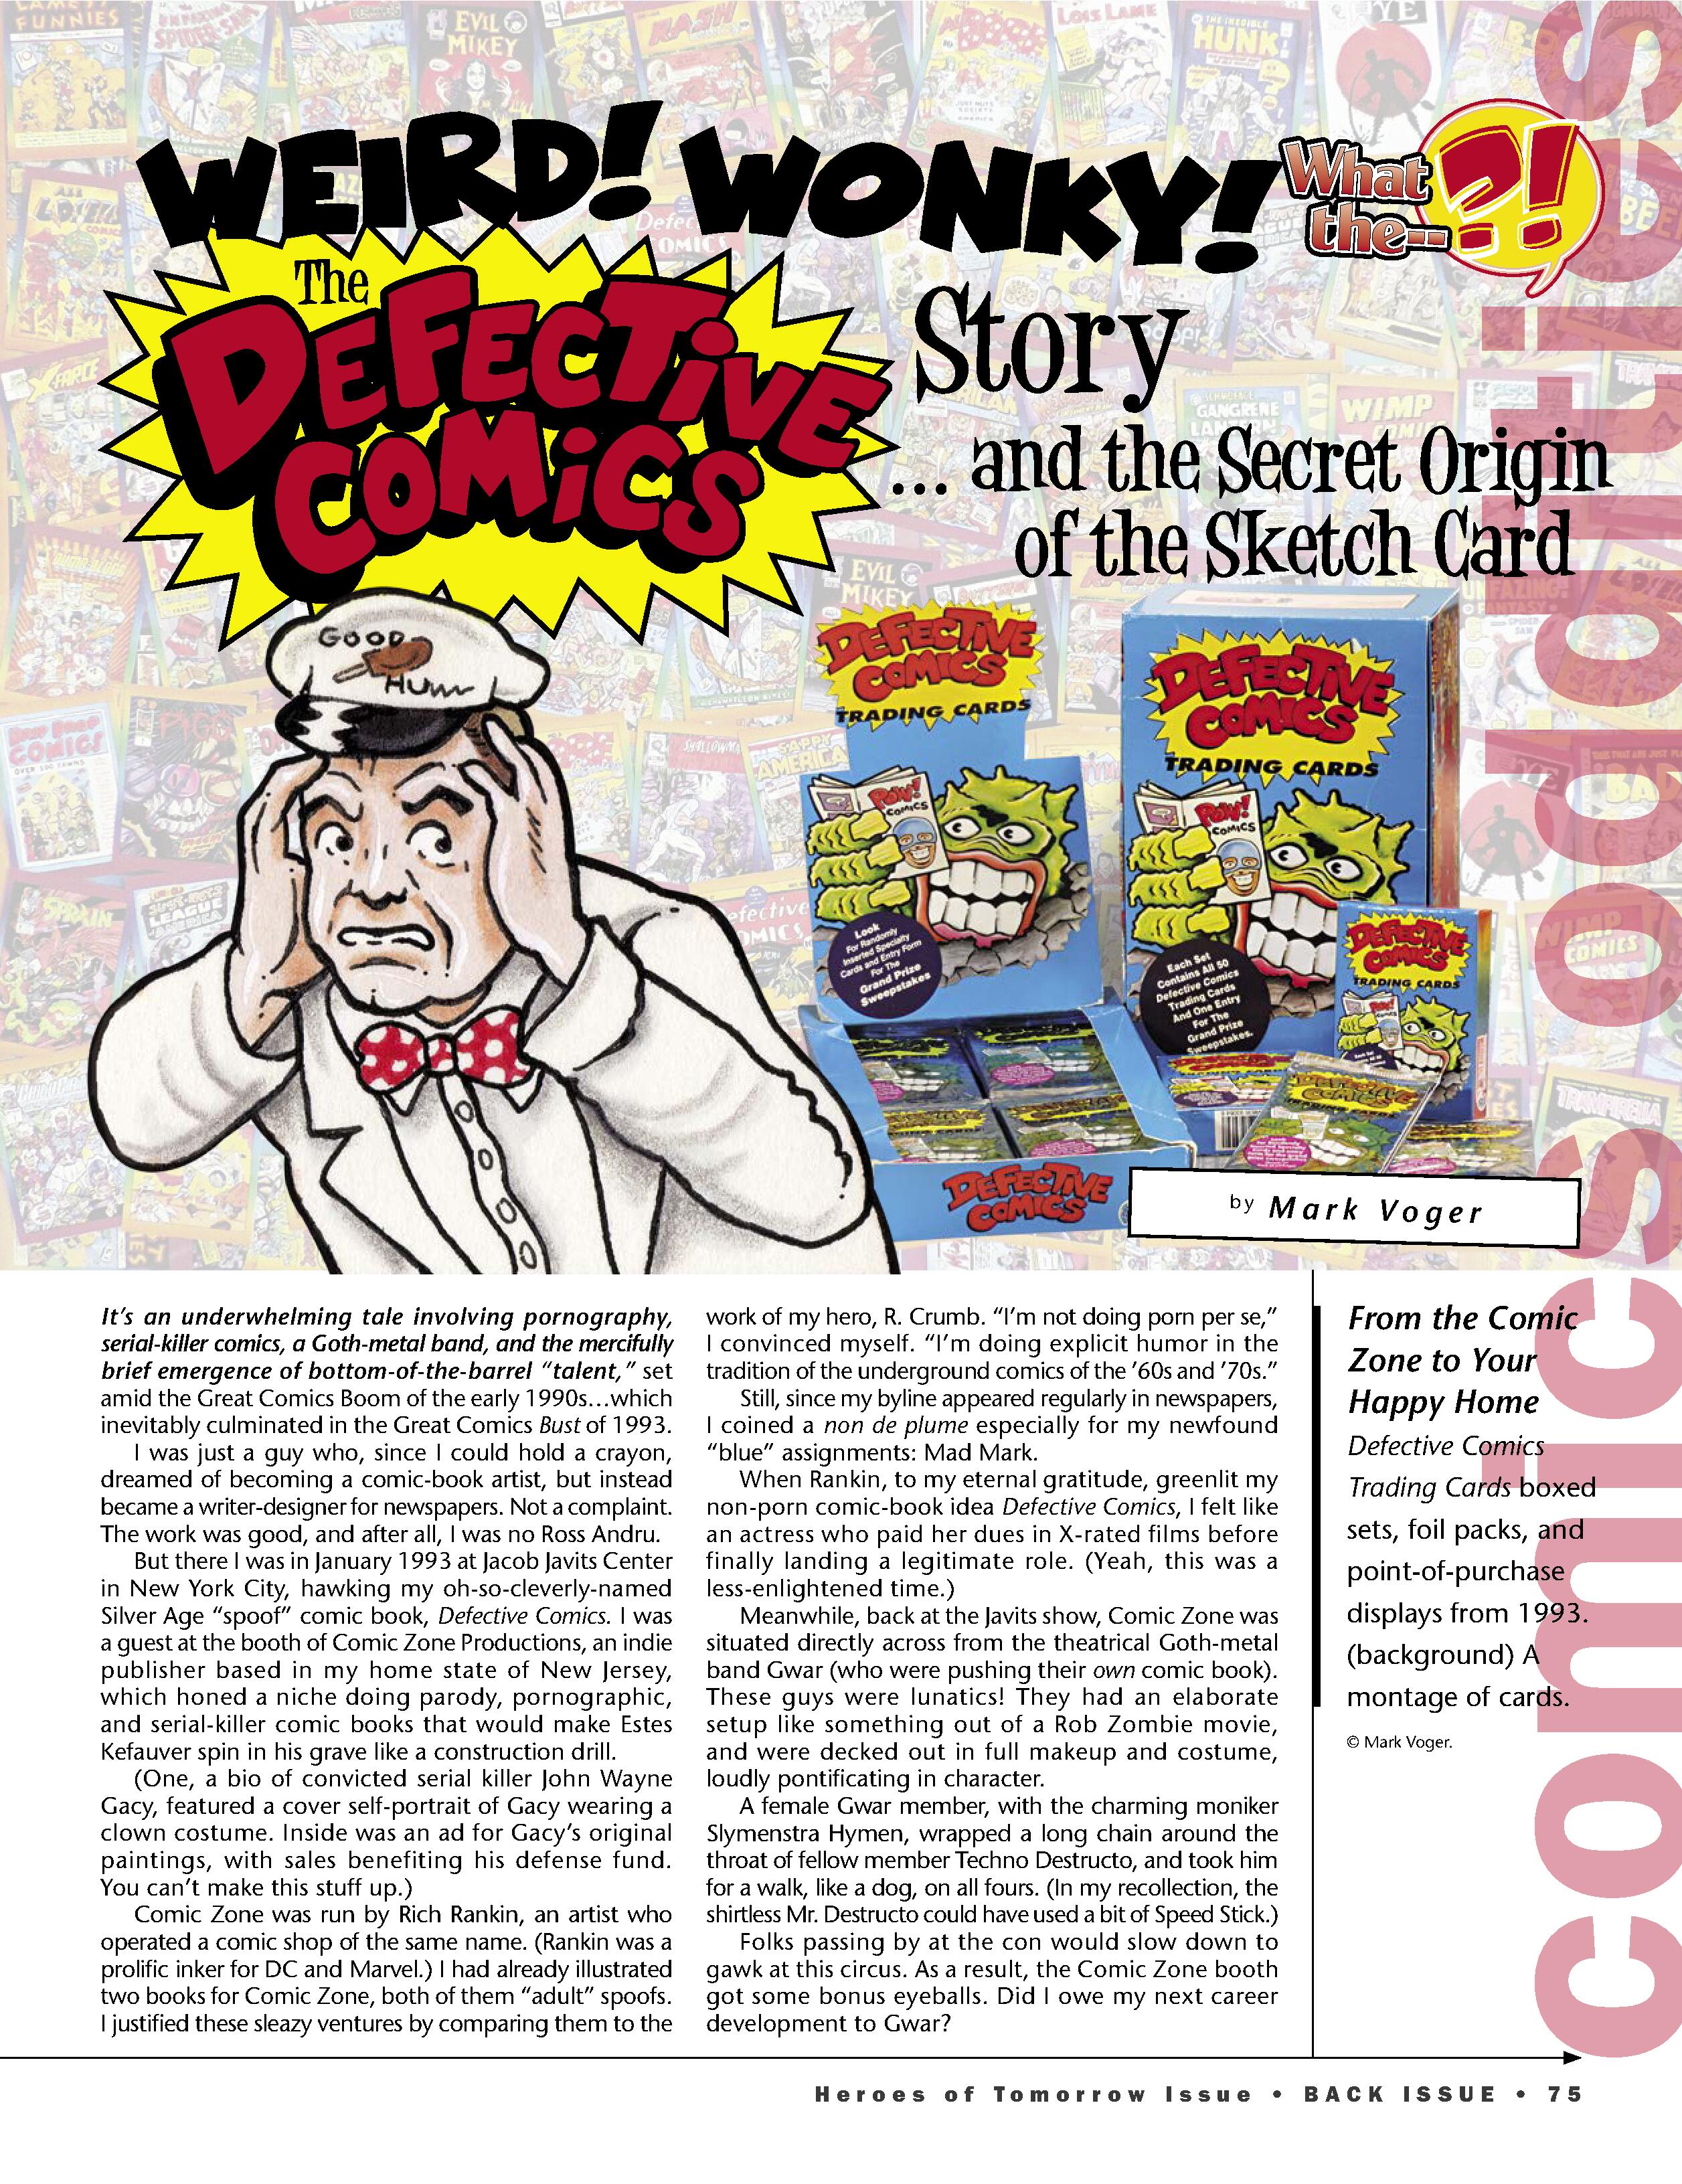 Read online Back Issue comic -  Issue #120 - 77